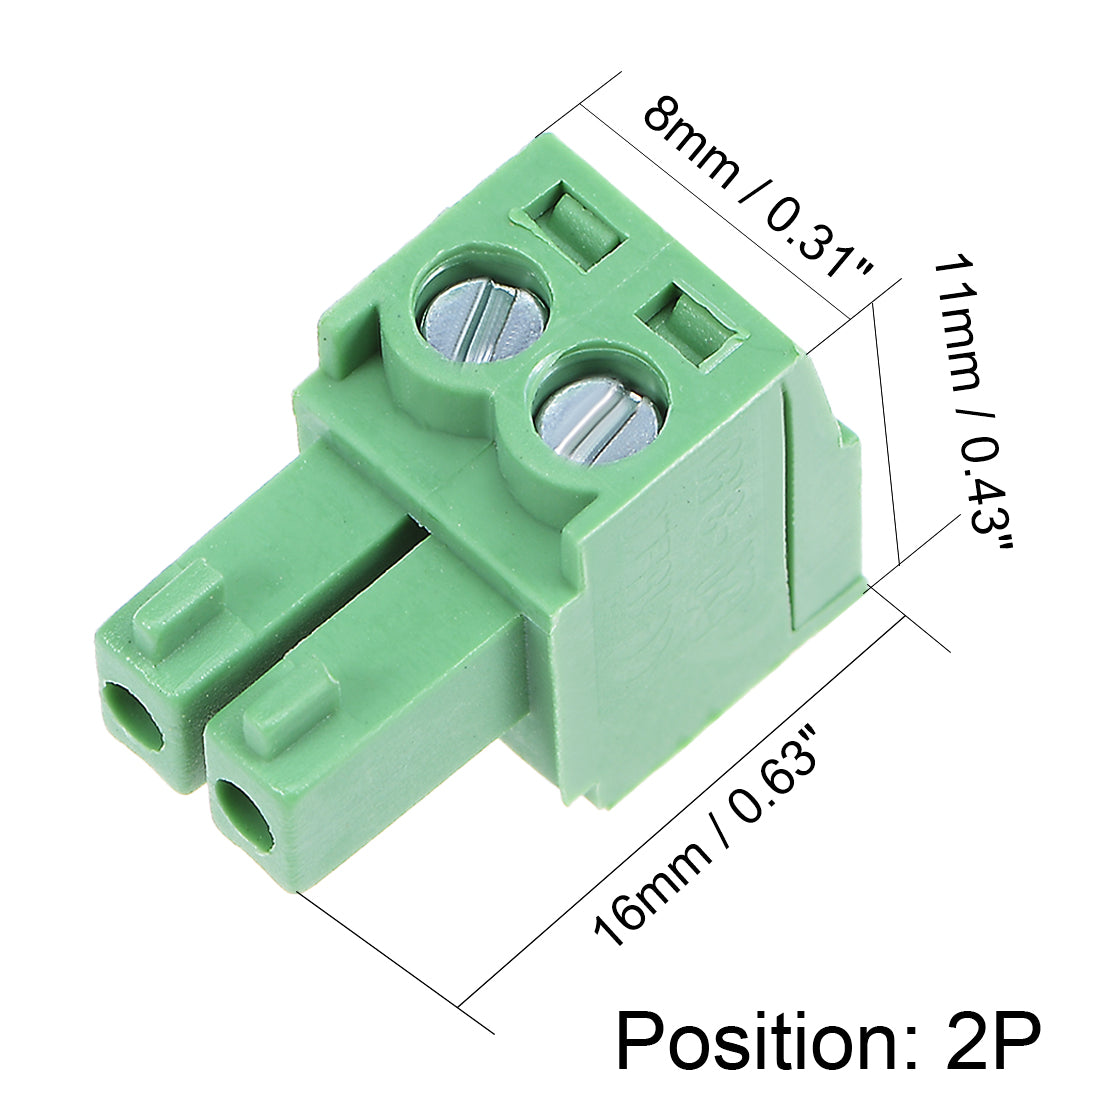 uxcell Uxcell 15Pcs AC 300V 8A 3.5mm Pitch 2P Flat Angle Needle Seat Insert-In PCB Terminal Block Connector green